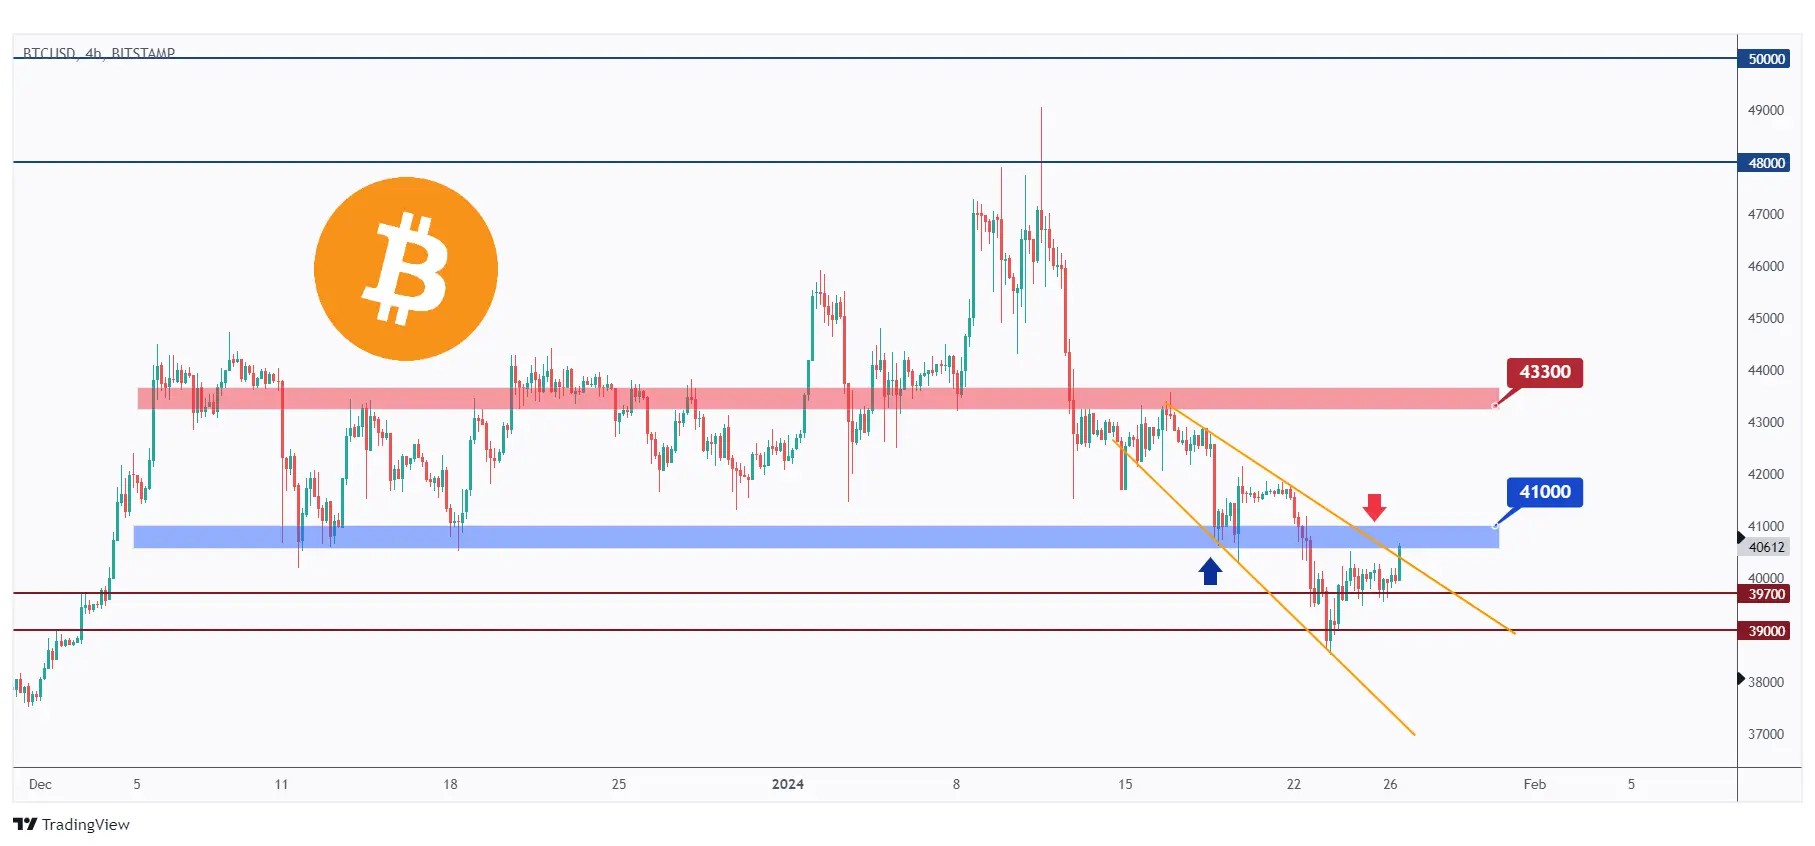 Bitcoin 4h chart showing the overall bearish bias and the last major high at $41,000 that we need a break above for the bulls to take over.